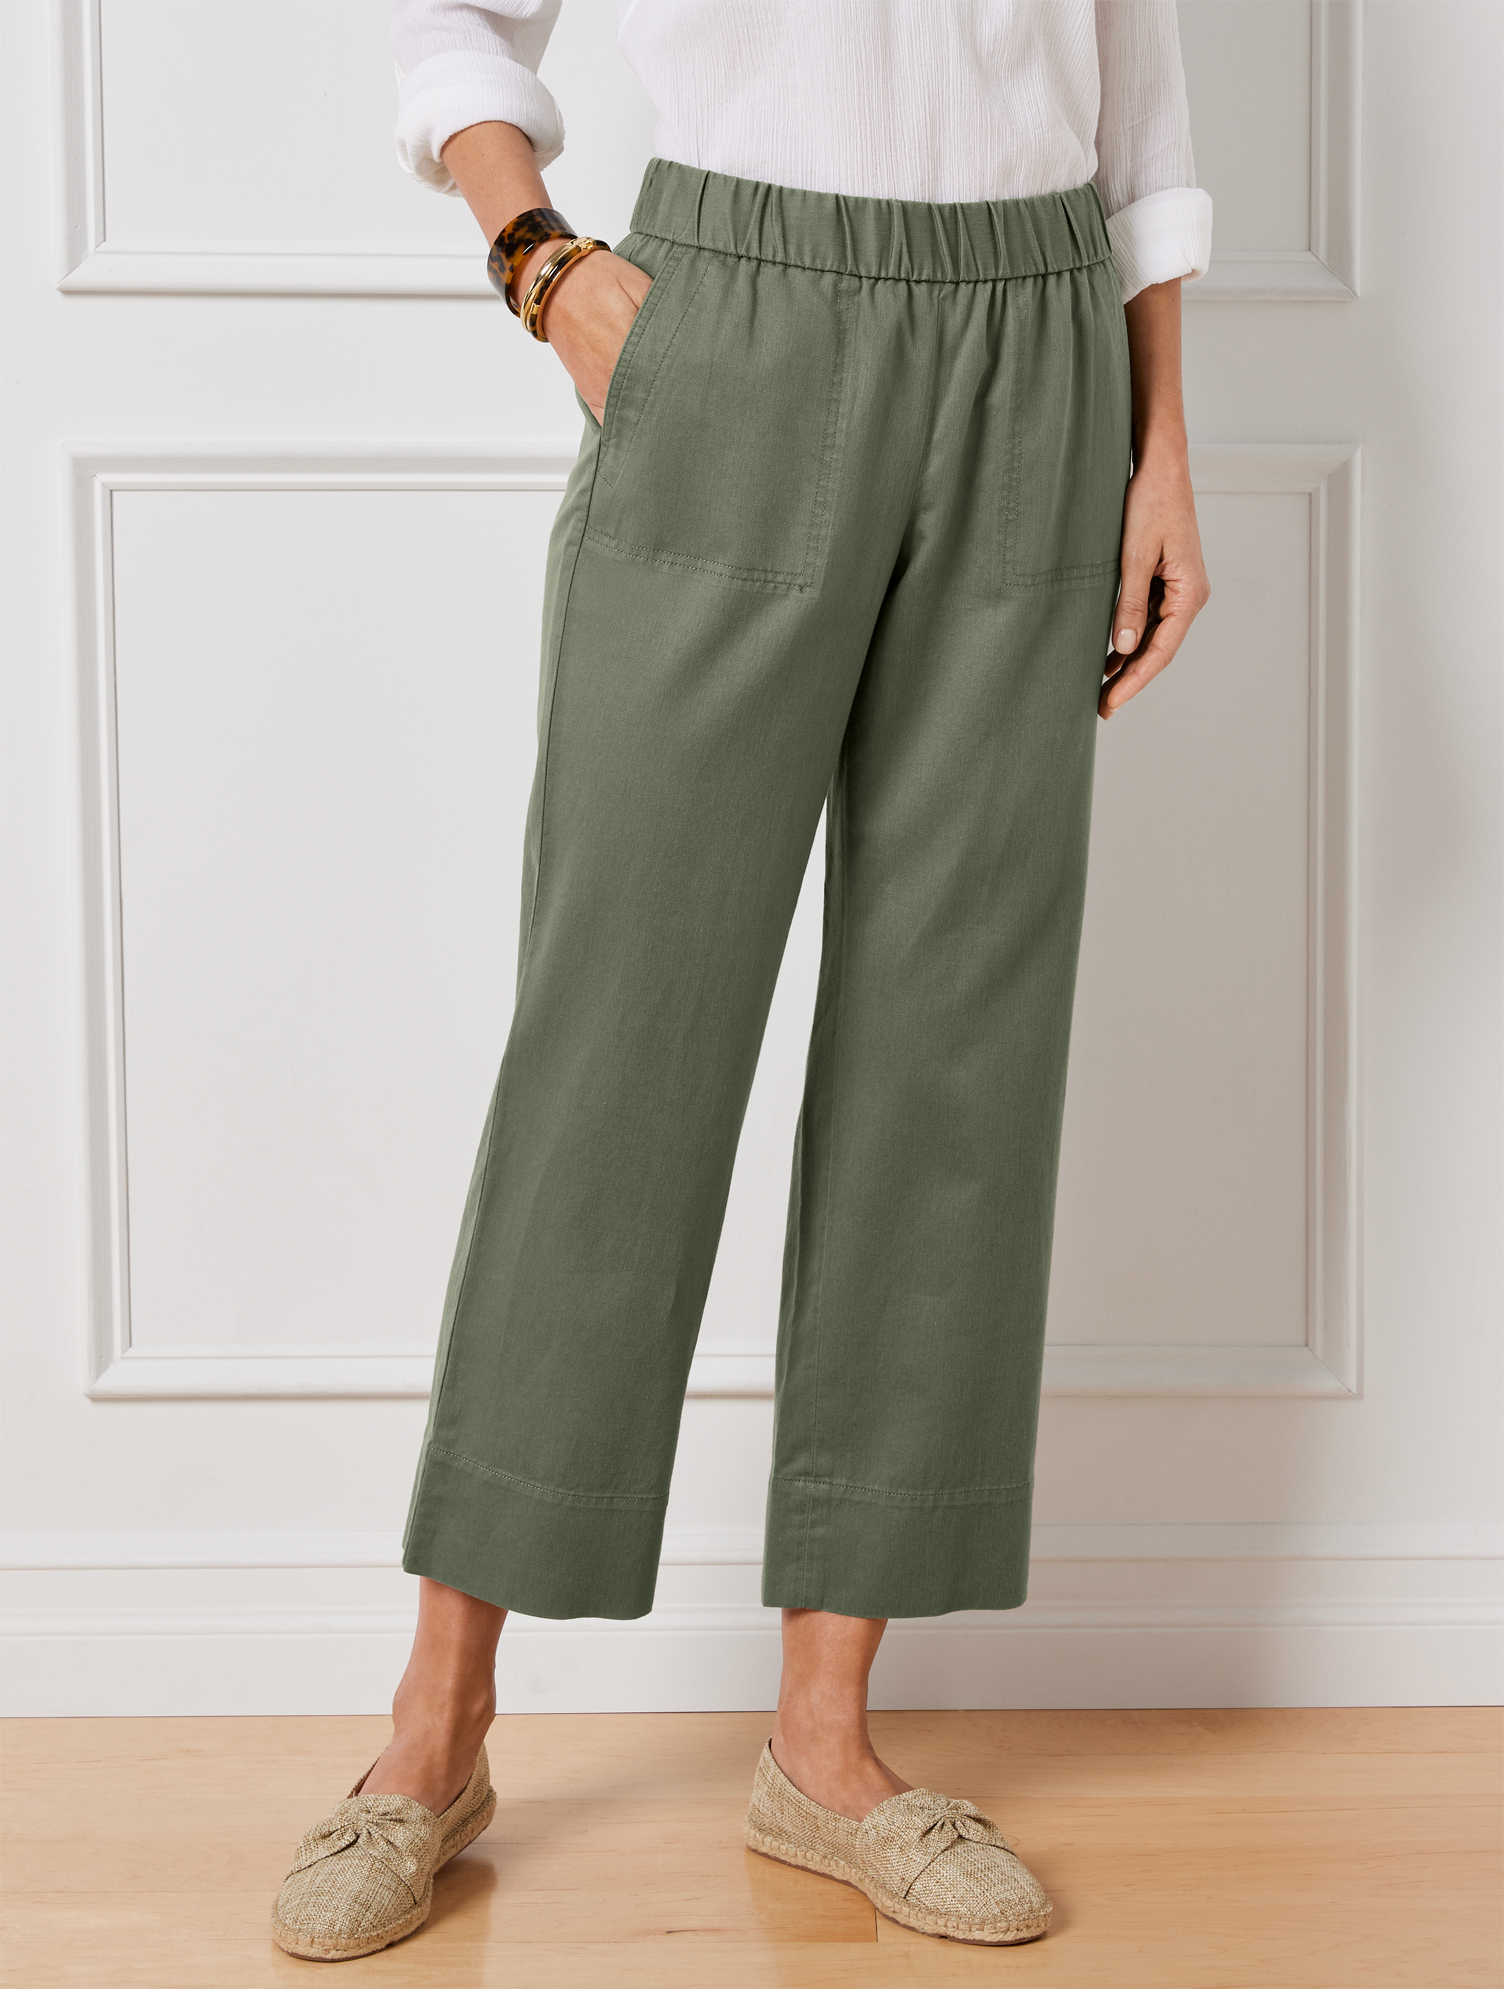 Talbots Petite - Pull-on Wide Crops Pants - Solids - Spring Moss - Large